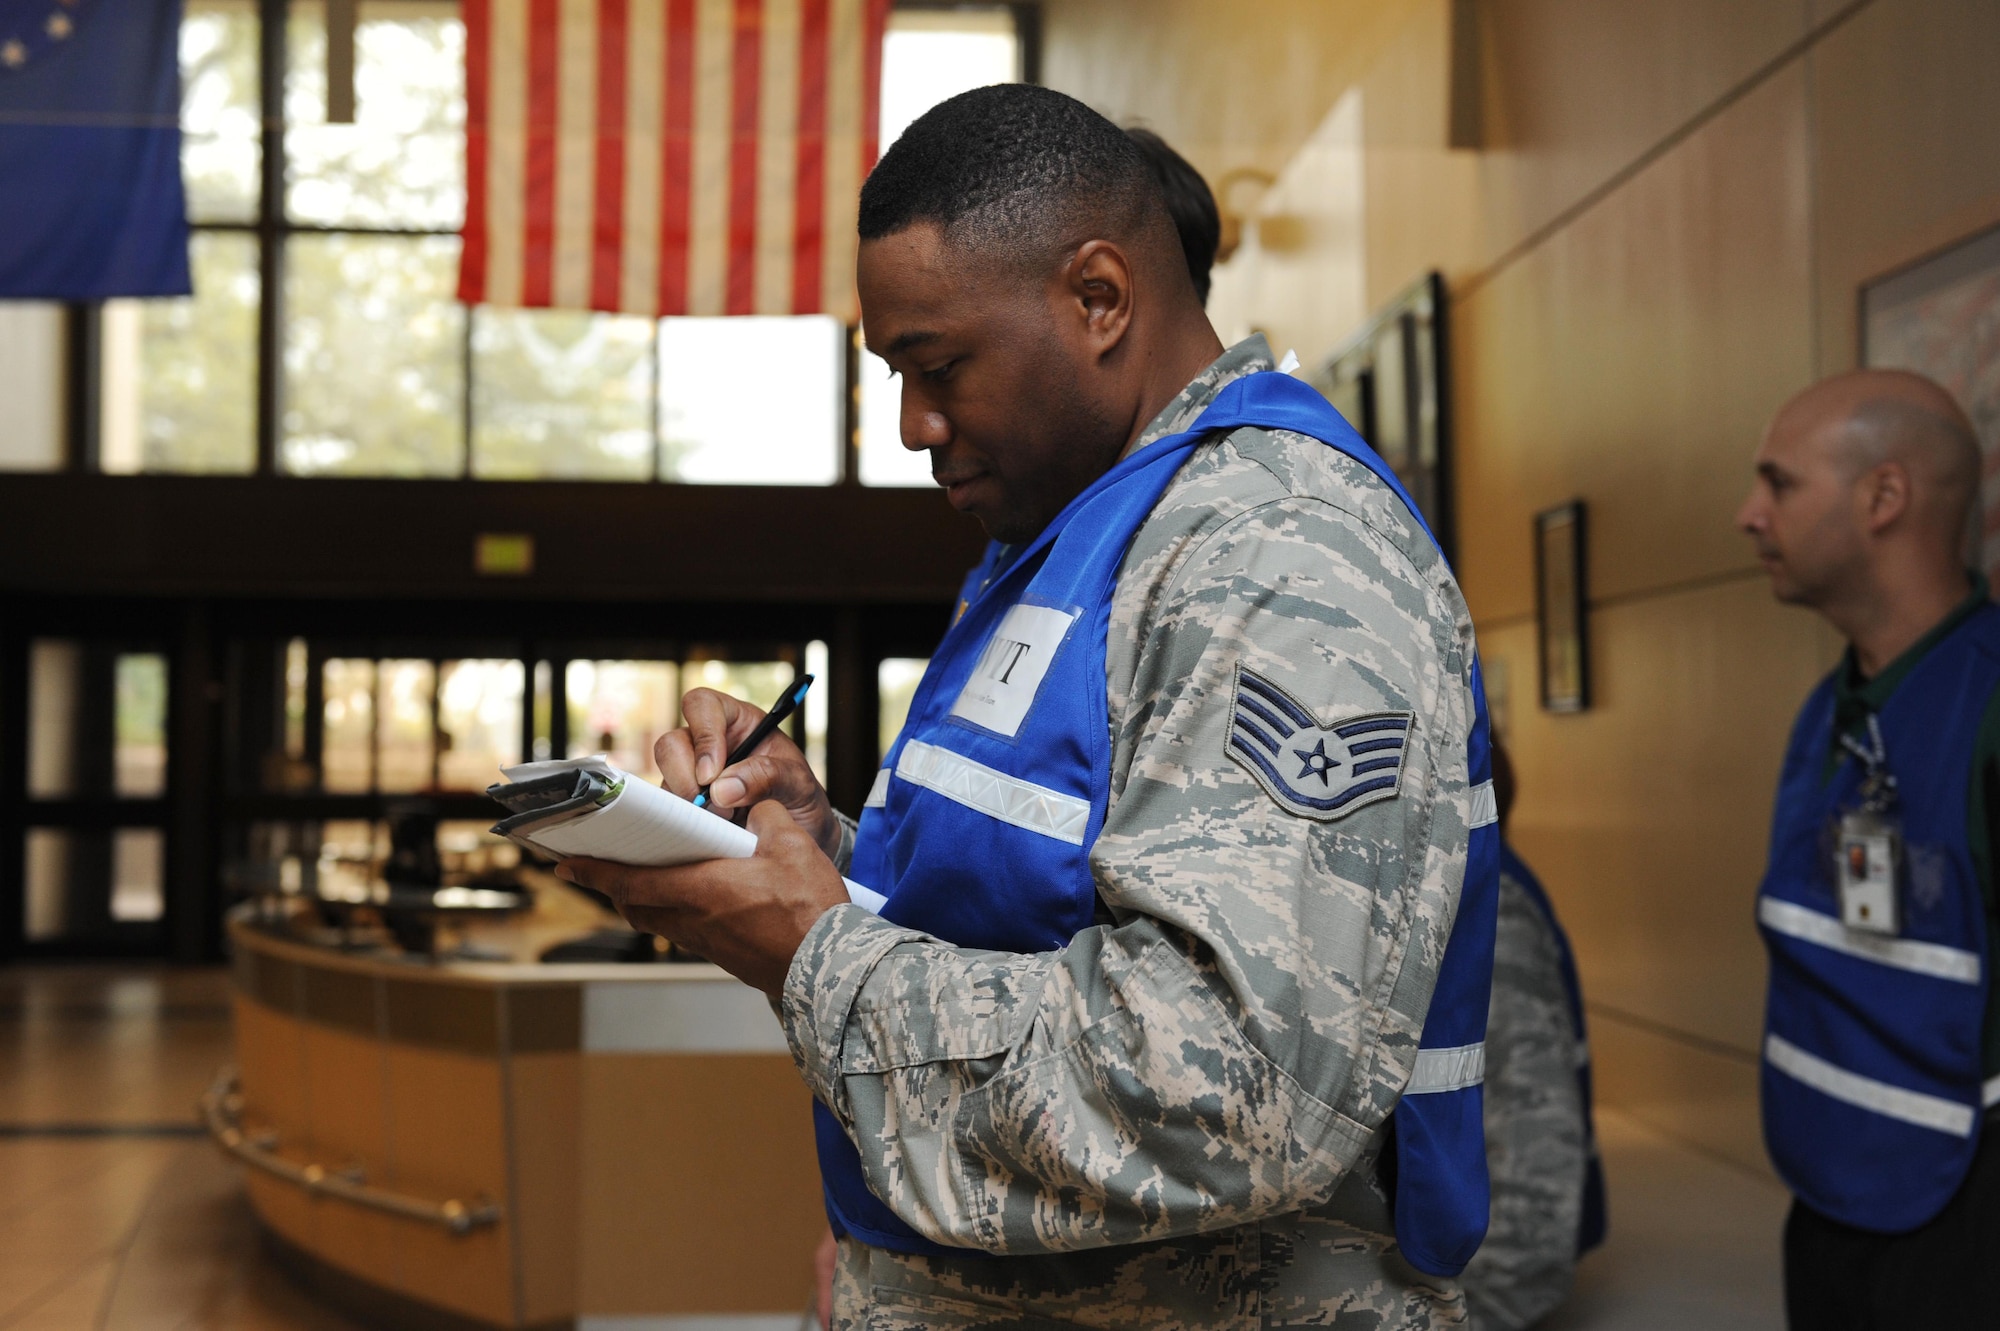 Staff Sgt. Detrick Jack, 81st Security Forces Squadron standardization evaluations NCO in charge and Wing Inspection Team member, takes notes during Keesler's active shooter exercise at the Keesler Medical Center Mar. 17, 2016, Keesler Air Force Base, Miss.  An active duty Air Force member simulated opening fire at the hospital to test the base's ability to respond to and recover from a mass casualty event. (U.S. Air Force photo by Kemberly Groue)